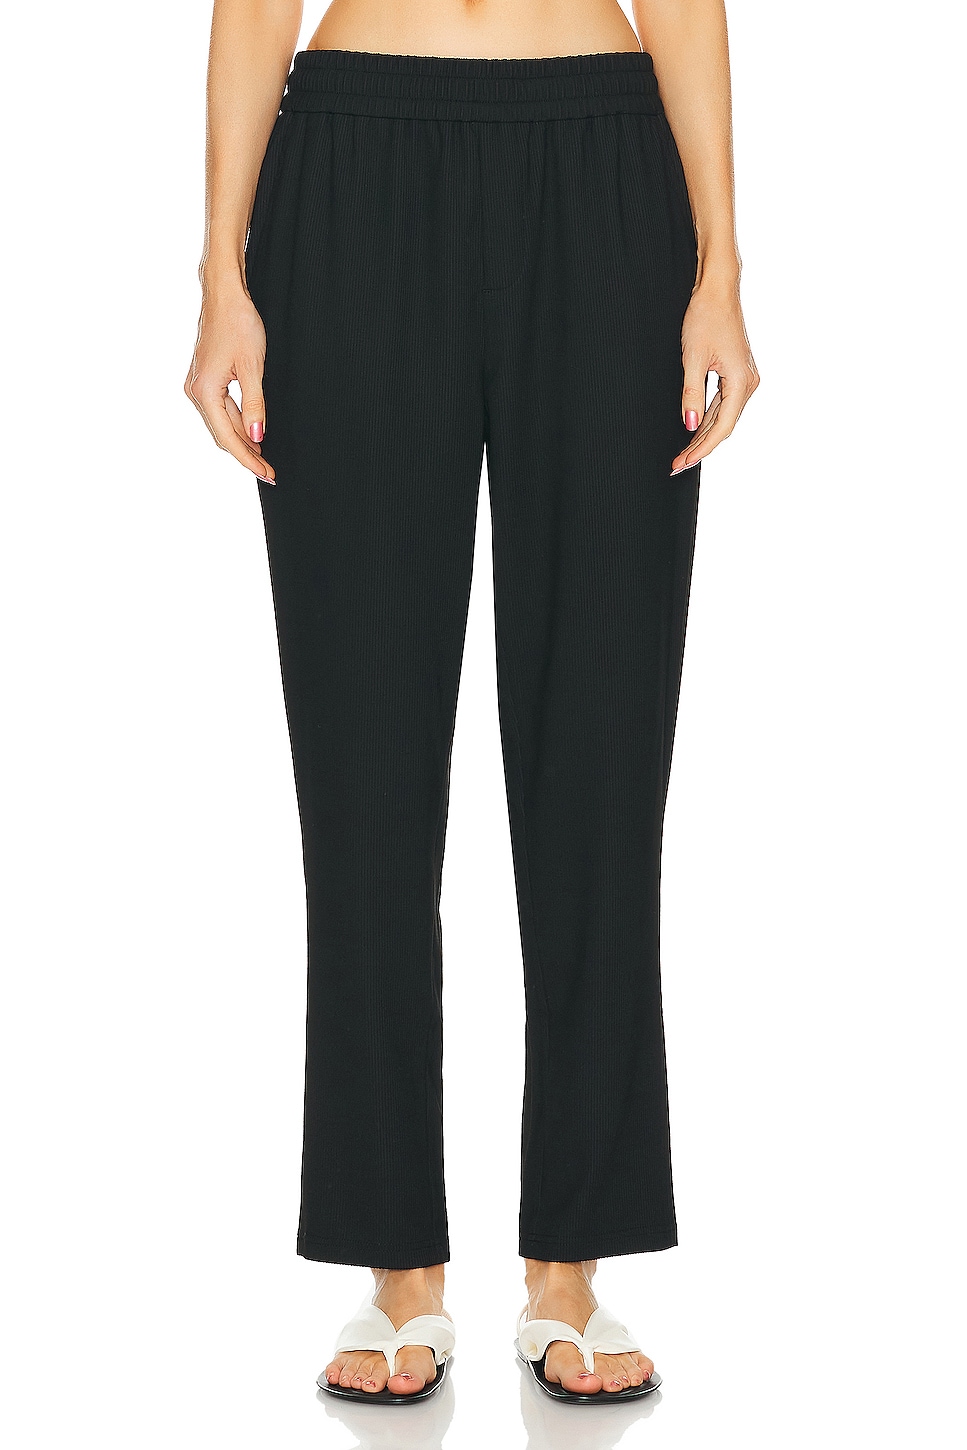 Image 1 of WAO Ribbed Knit Pant in black